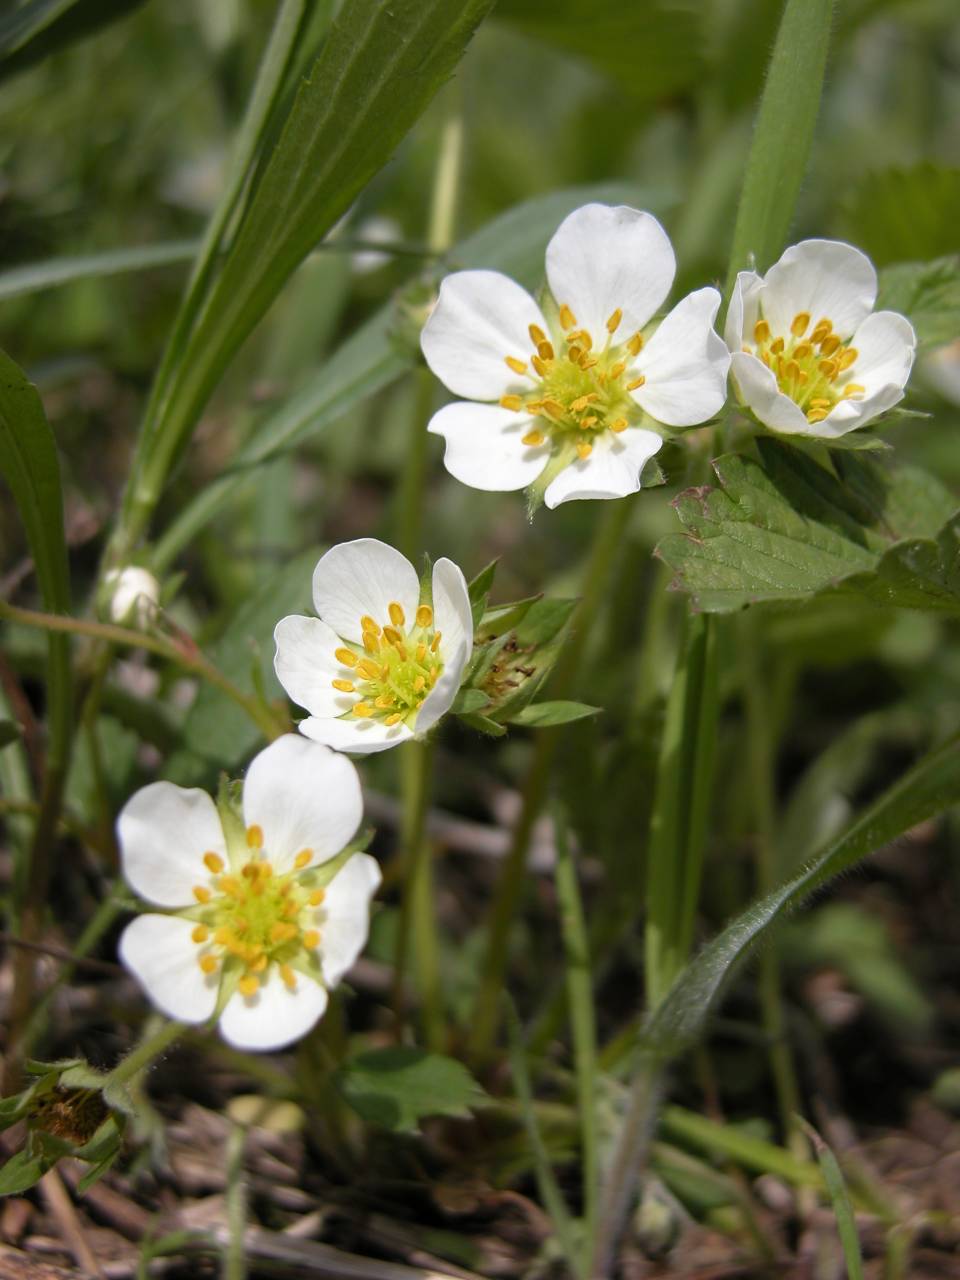 Thick-leaved wild strawberry